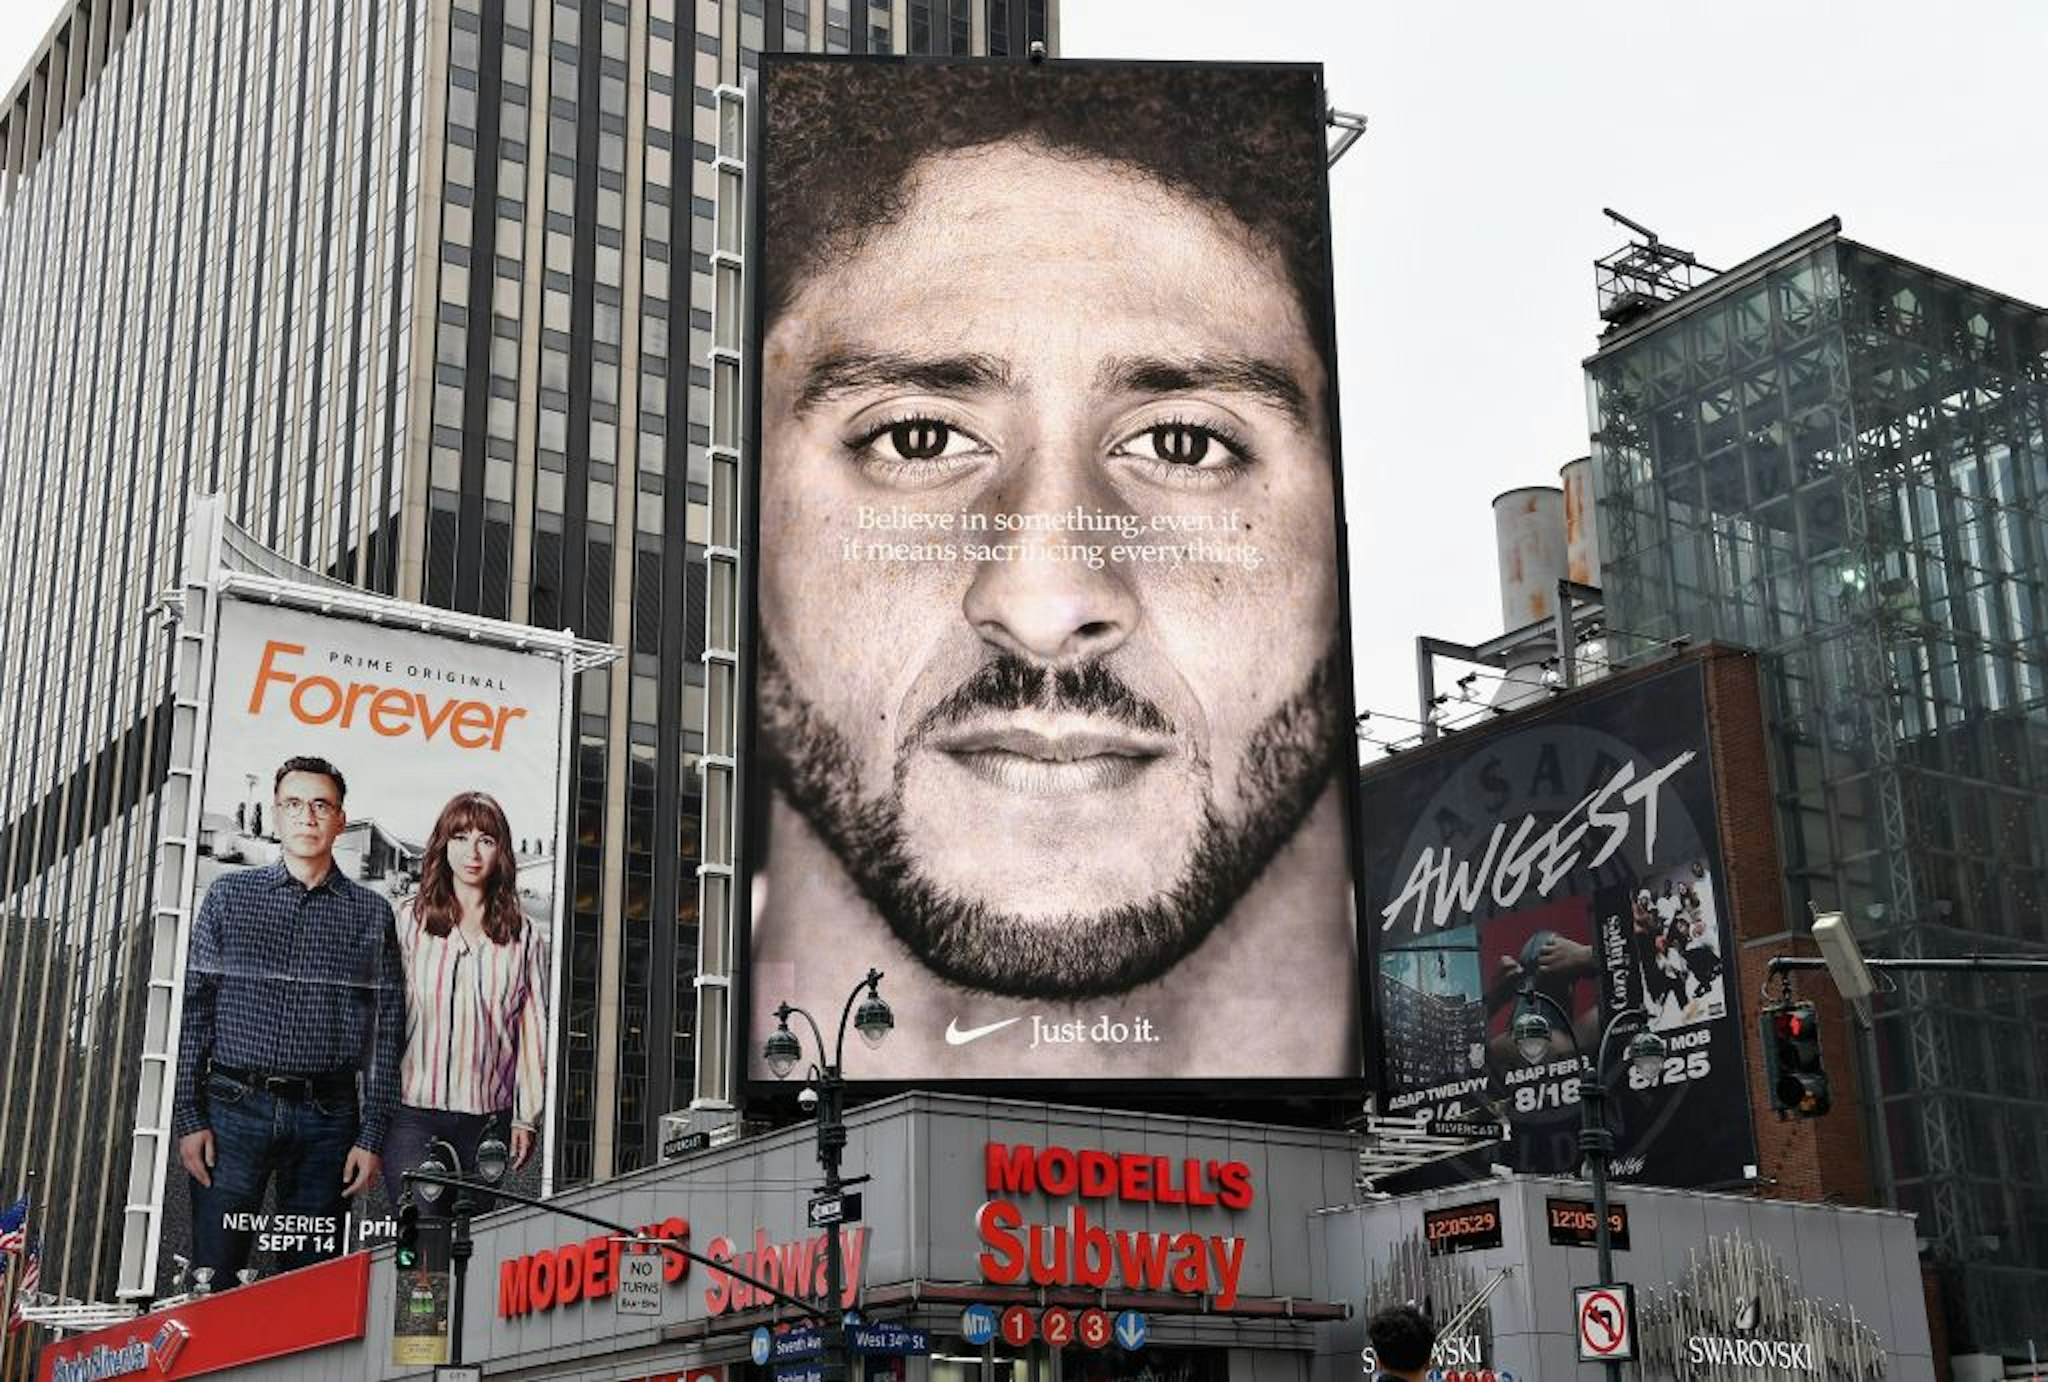 A Nike Ad featuring American football quarterback Colin Kaepernick is on diplay September 8, 2018 in New York City.